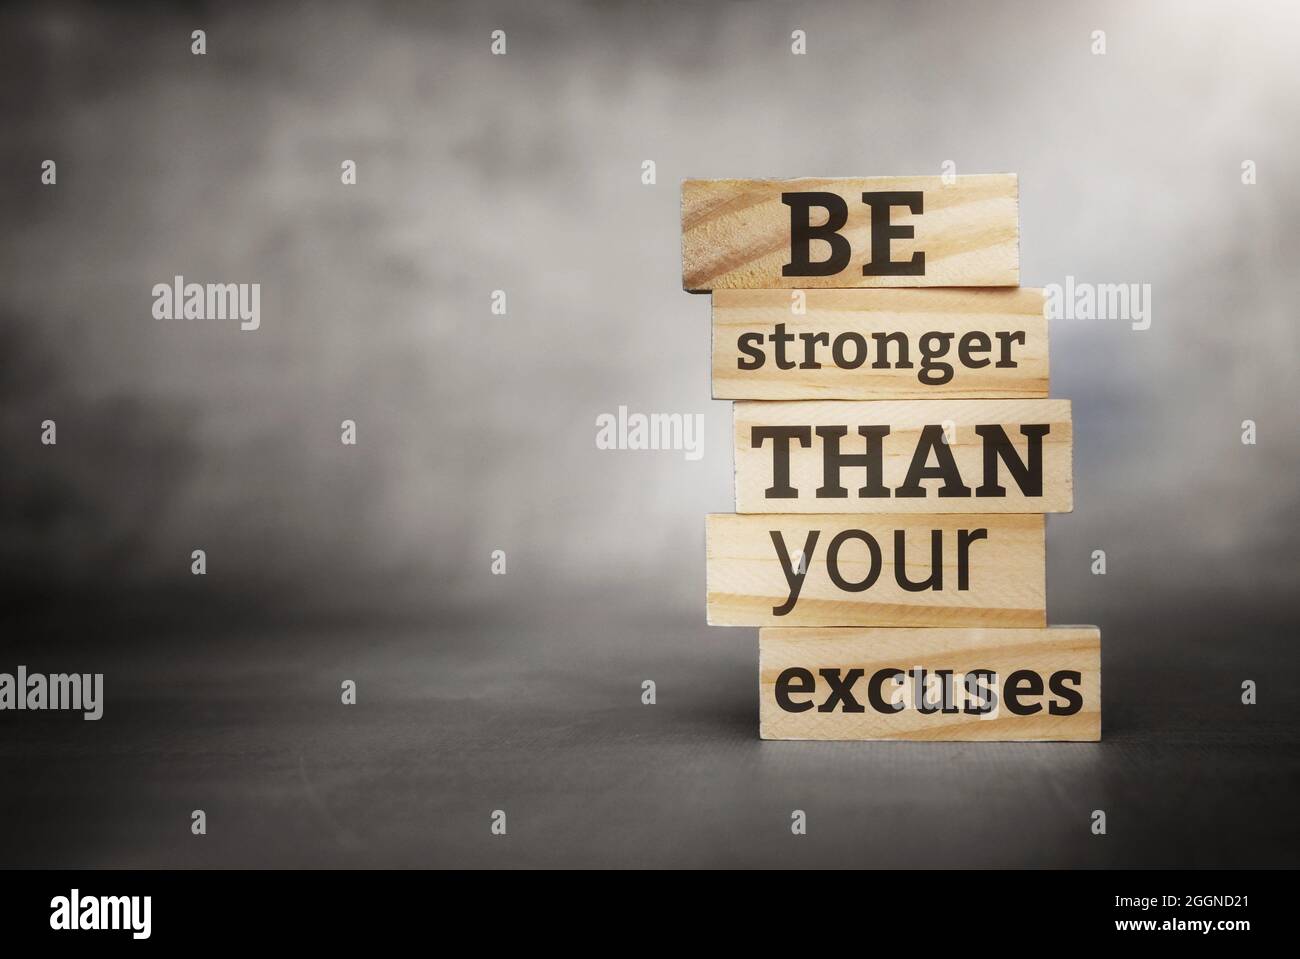 Motivational and inspirational quotes- Be stronger than your excuses Stock Photo